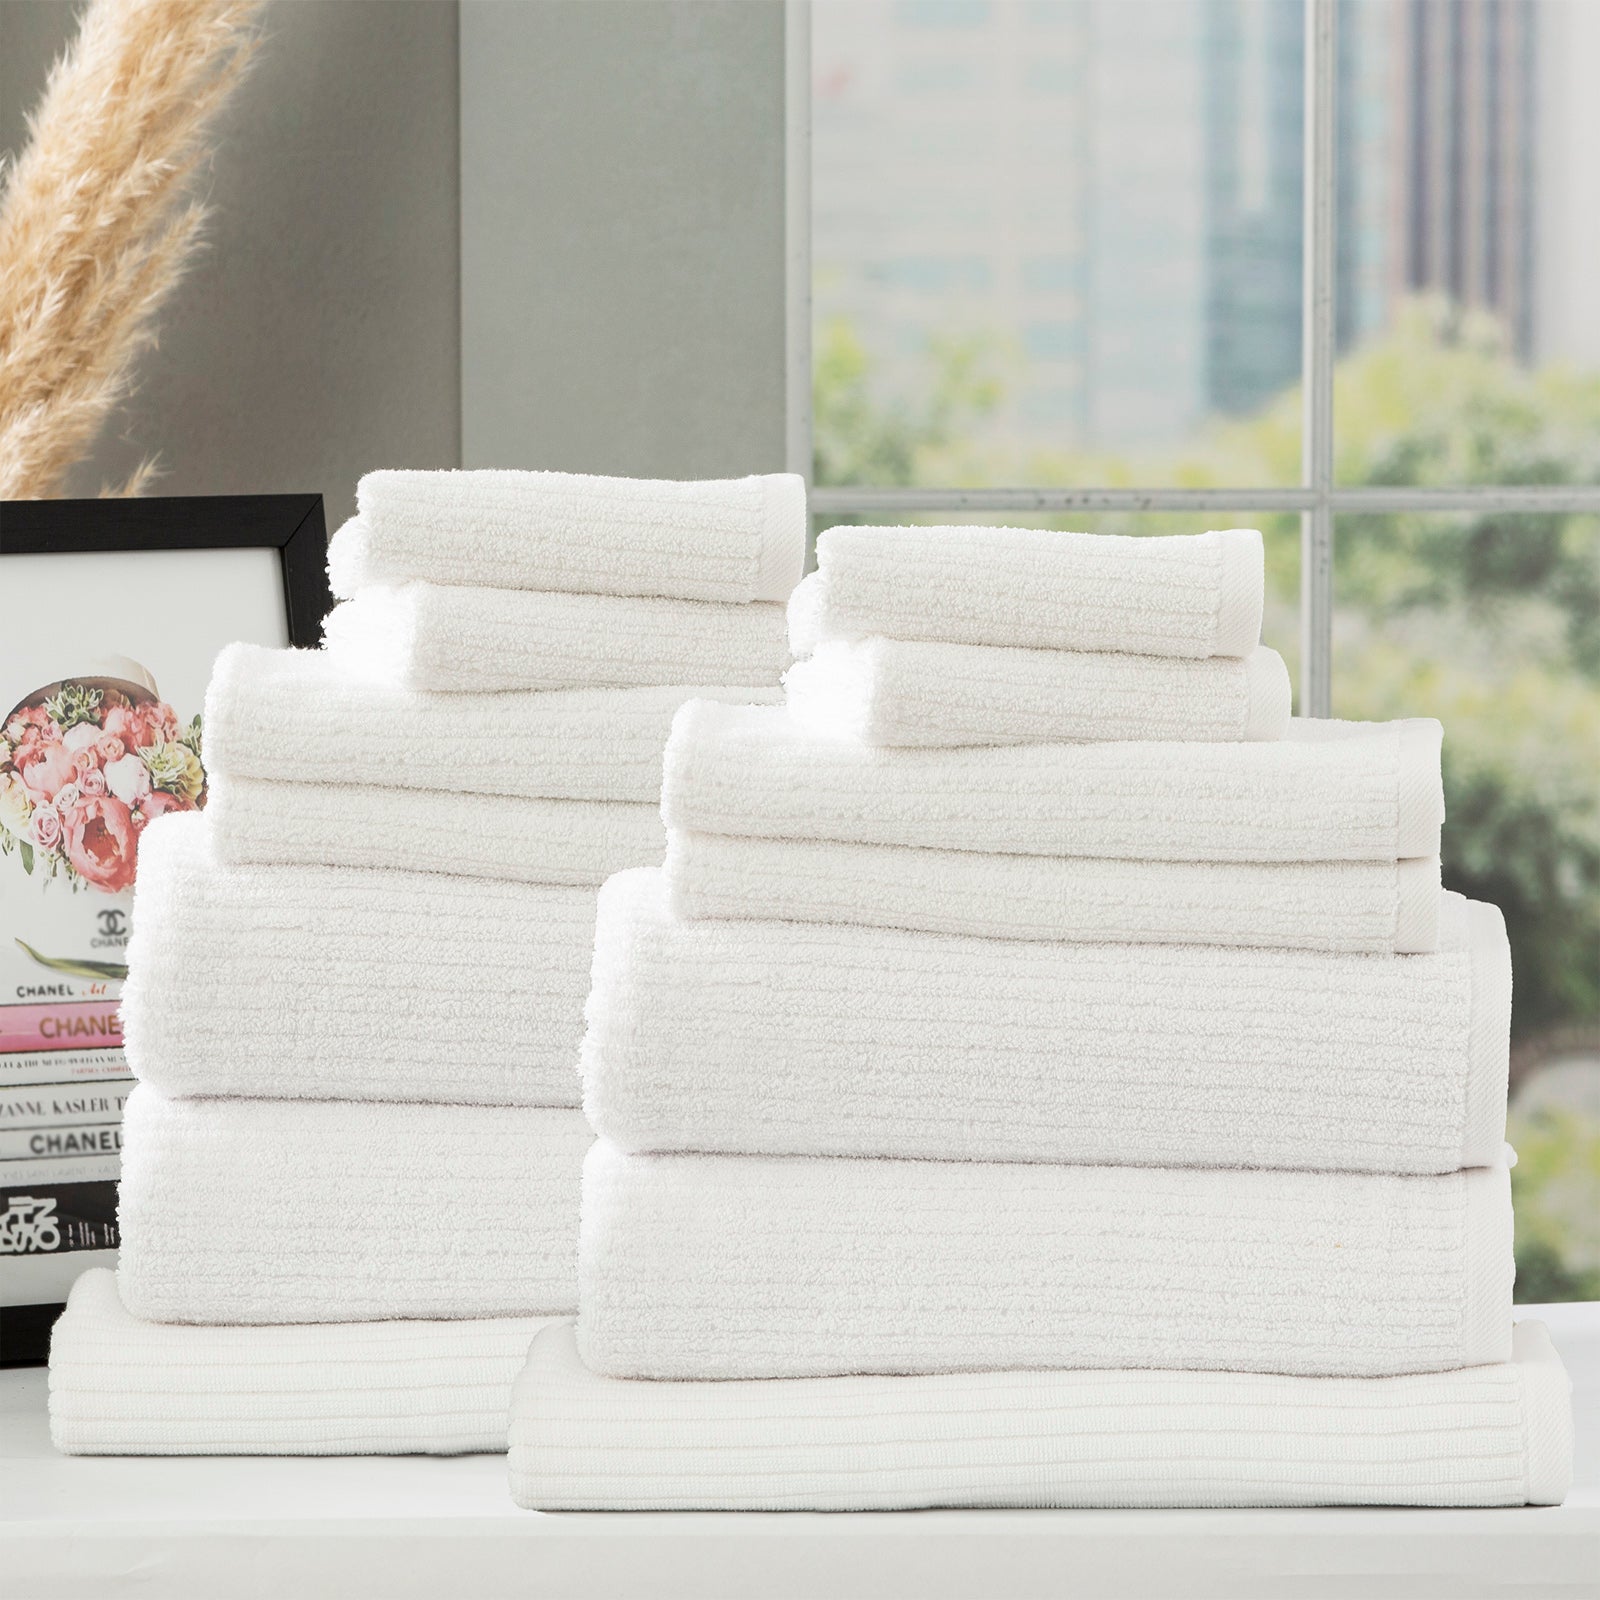 Renee Taylor Cobblestone 650 GSM Cotton Ribbed Towel Packs 14pc White